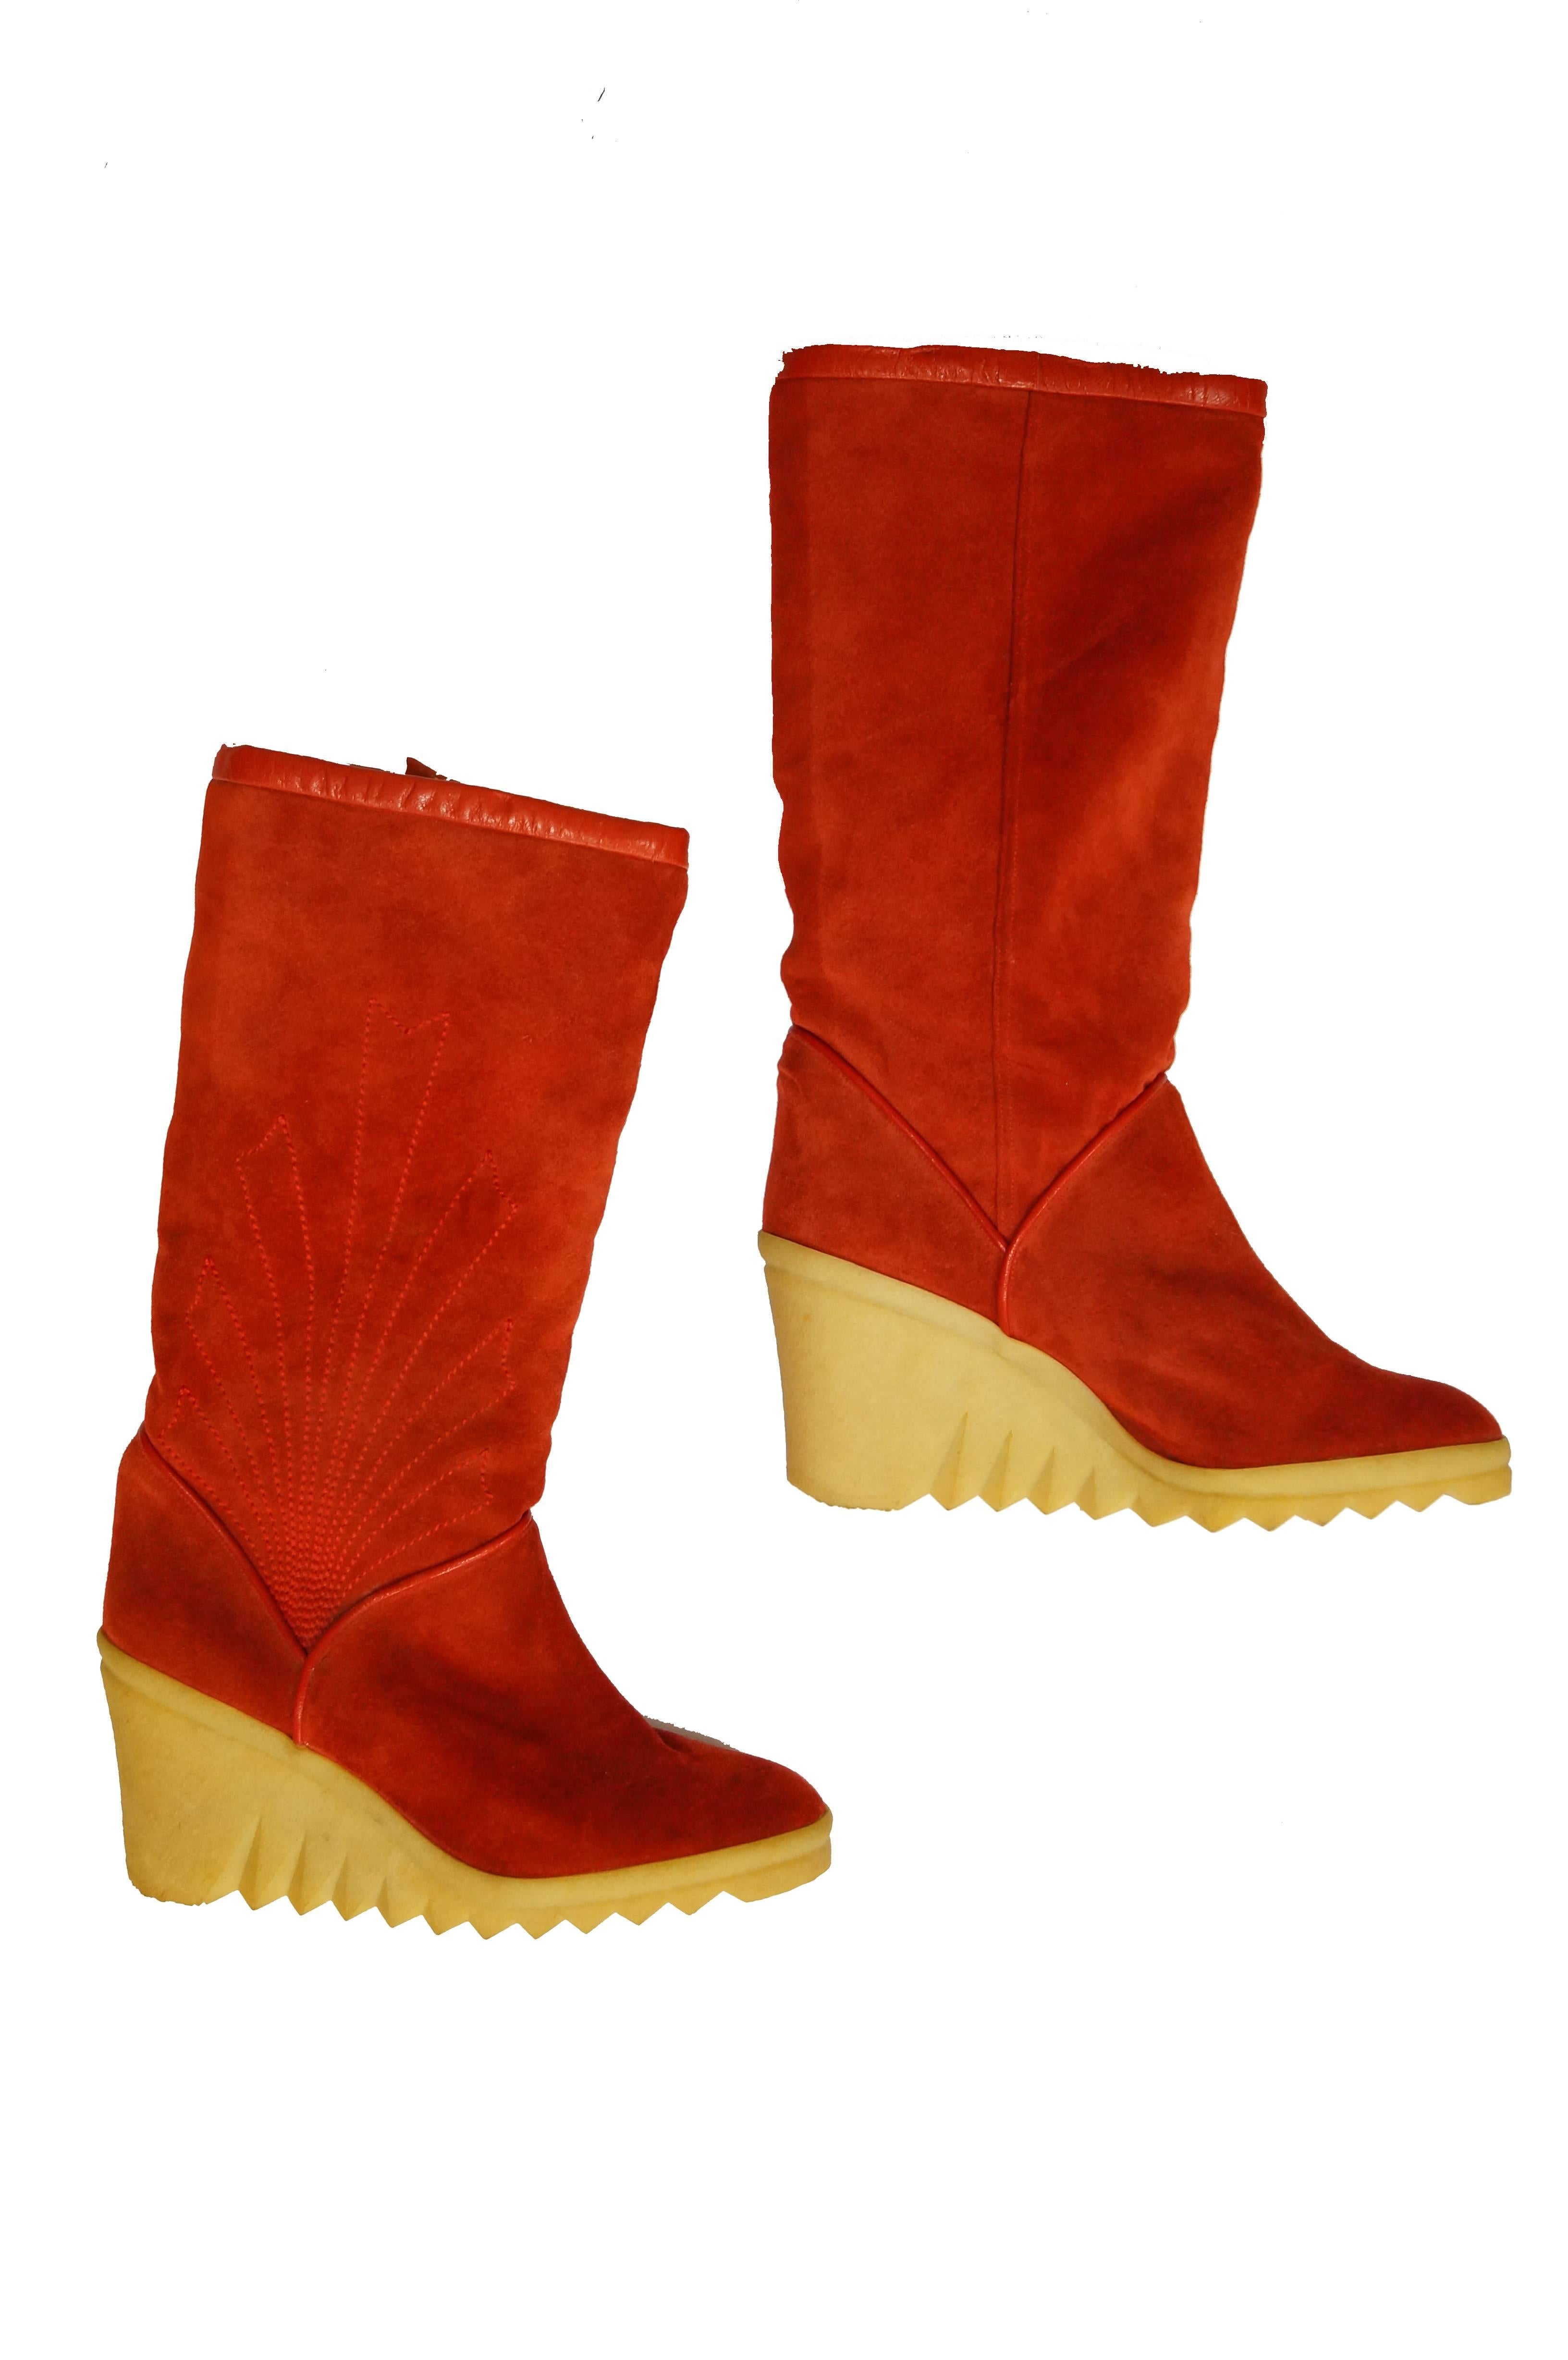 1970's Wedge boots by Charles Jourdan featuring a cherry red suede and natural rubber heels. The boots have a tall zig - zag tread, red trim at the top, and a wonderful sunrise - like stitch detail on the outer panels.  Climb a mountain - or climb